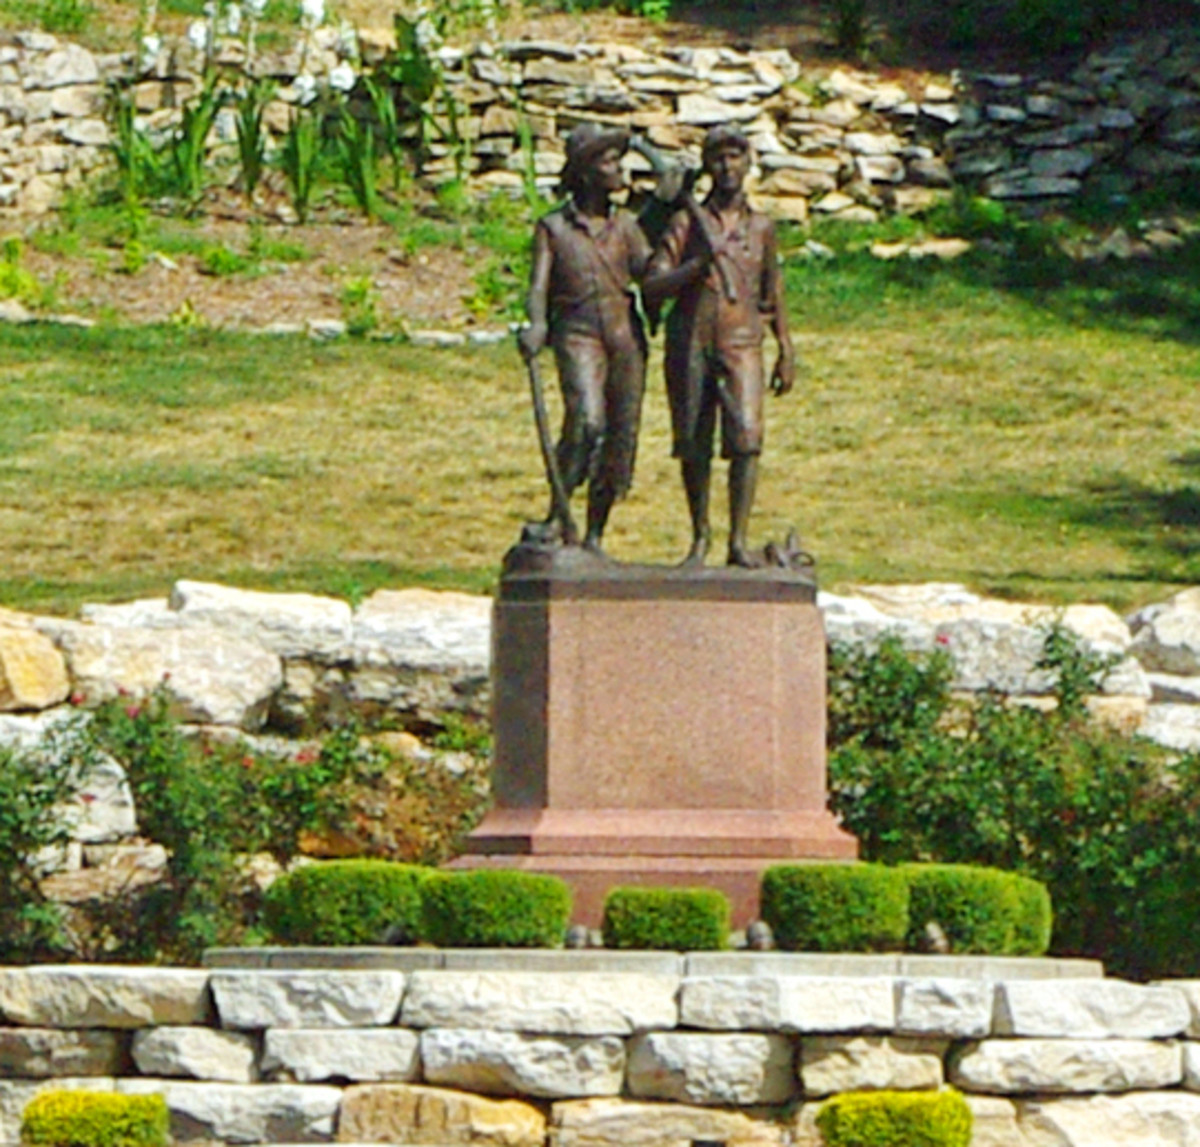 The 1926 Tom and Huck Statue located at North and Main Street, below Cardiff Hill, is also a Museum property